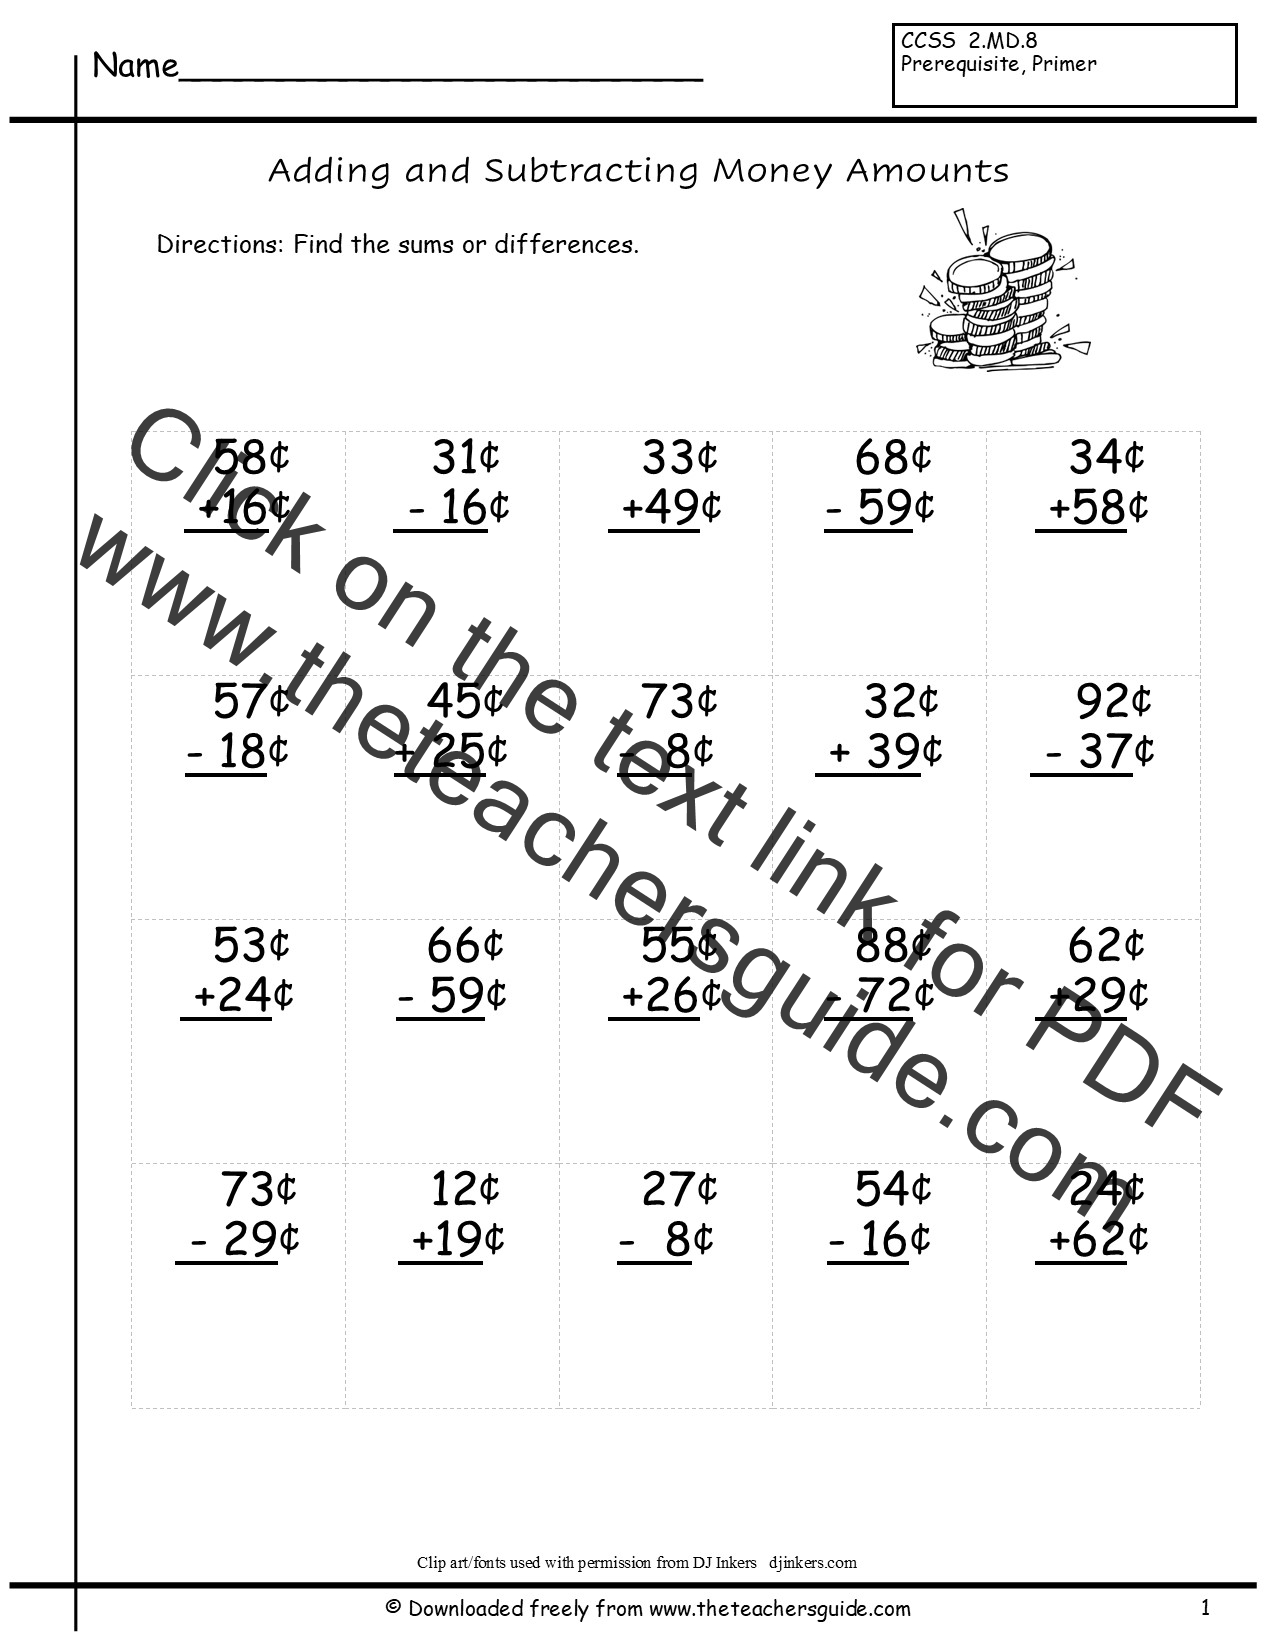 Add And Subtract Money Worksheet